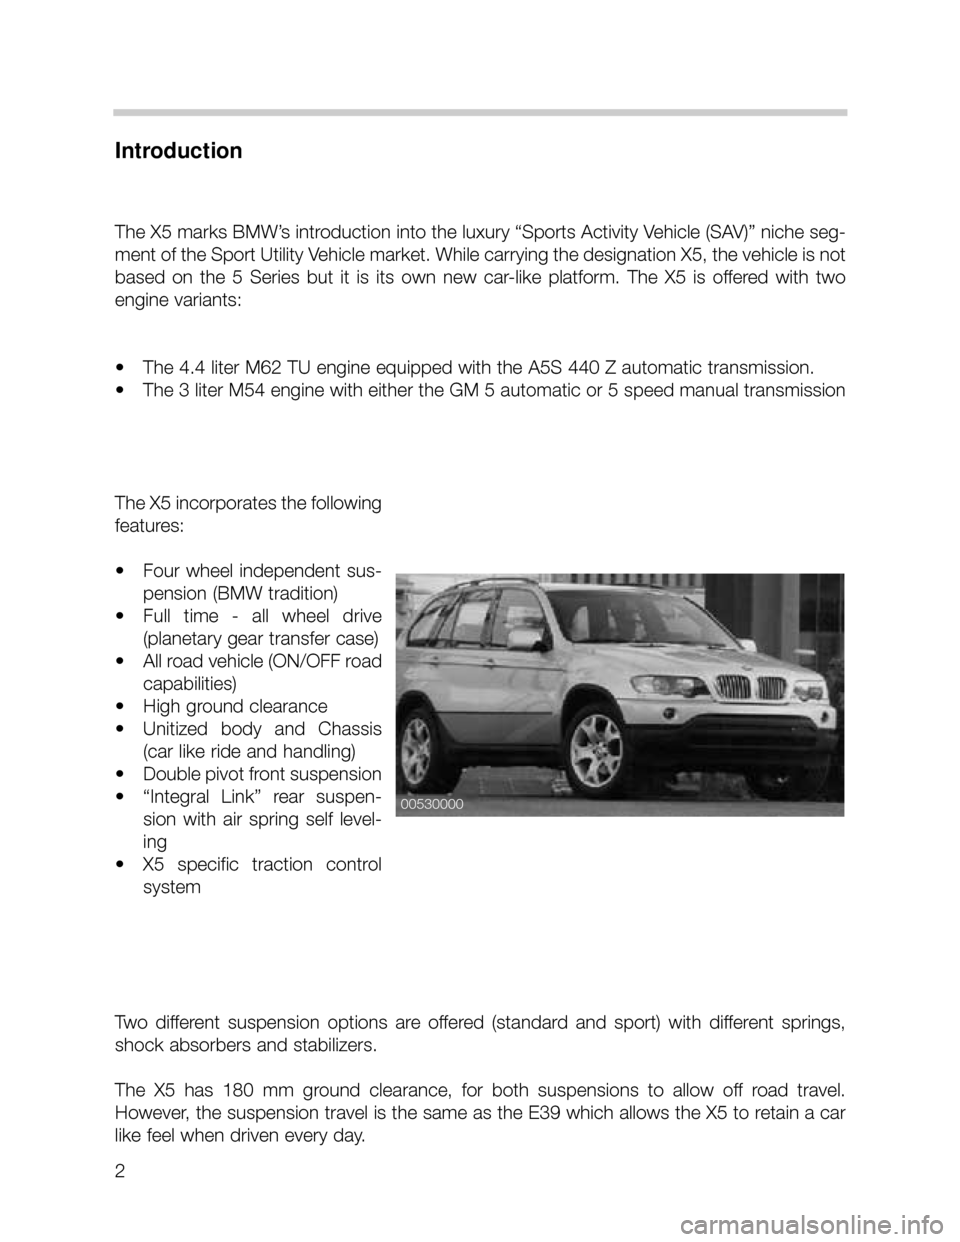 BMW X5 2003 E53 Workshop Manual 2
Introduction
The X5 marks BMW’s introduction into the luxury “Sports Activity Vehicle (SAV)” niche seg-
ment of the Sport Utility Vehicle market. While carrying the designation X5, the vehicle